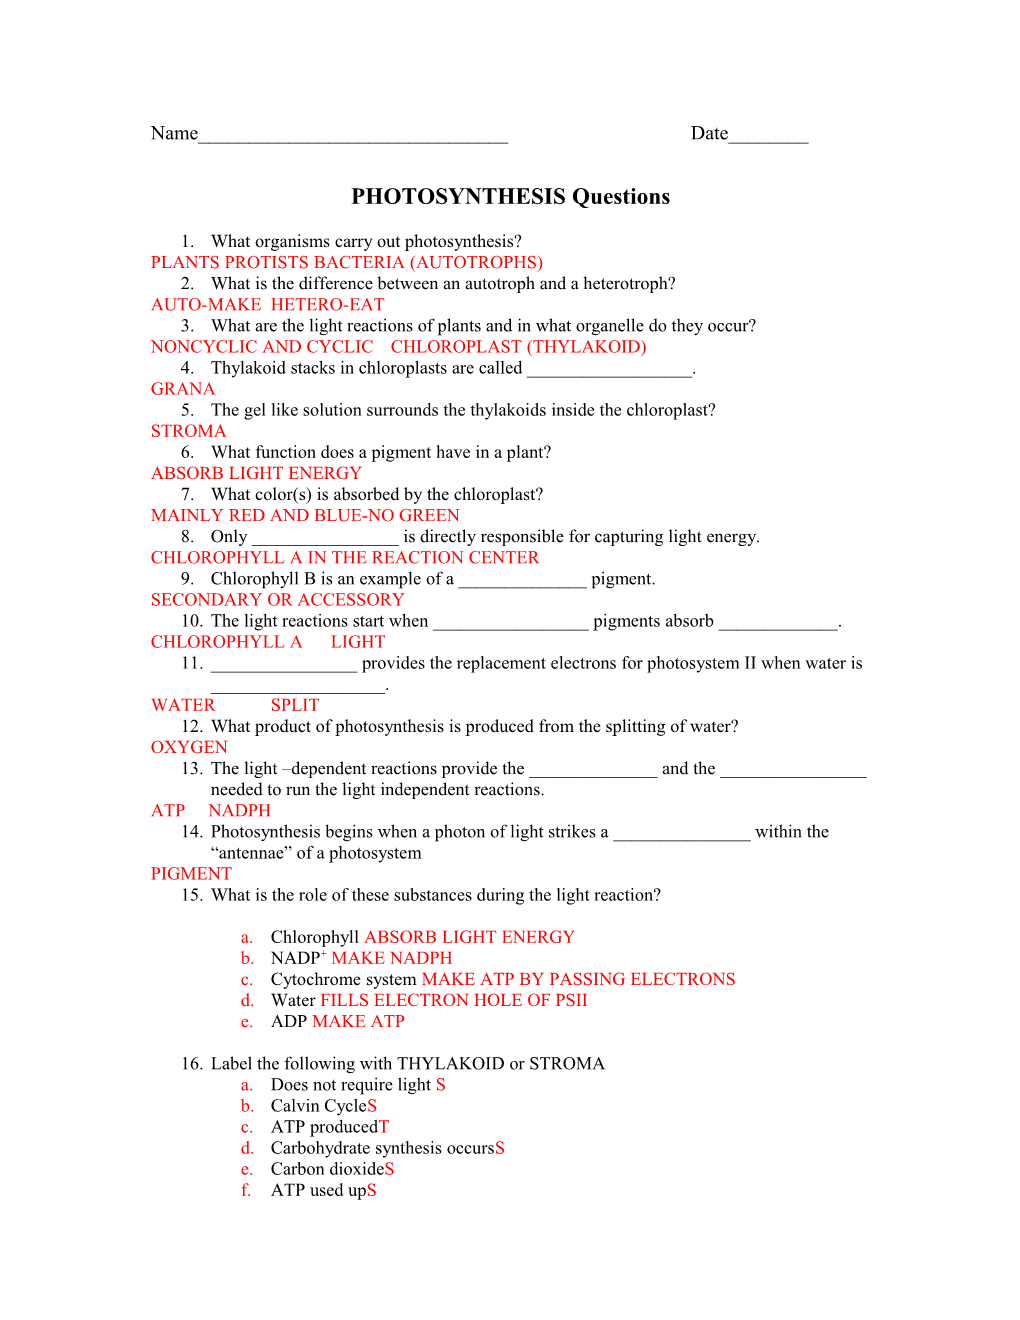 PHOTOSYNTHESIS Questions